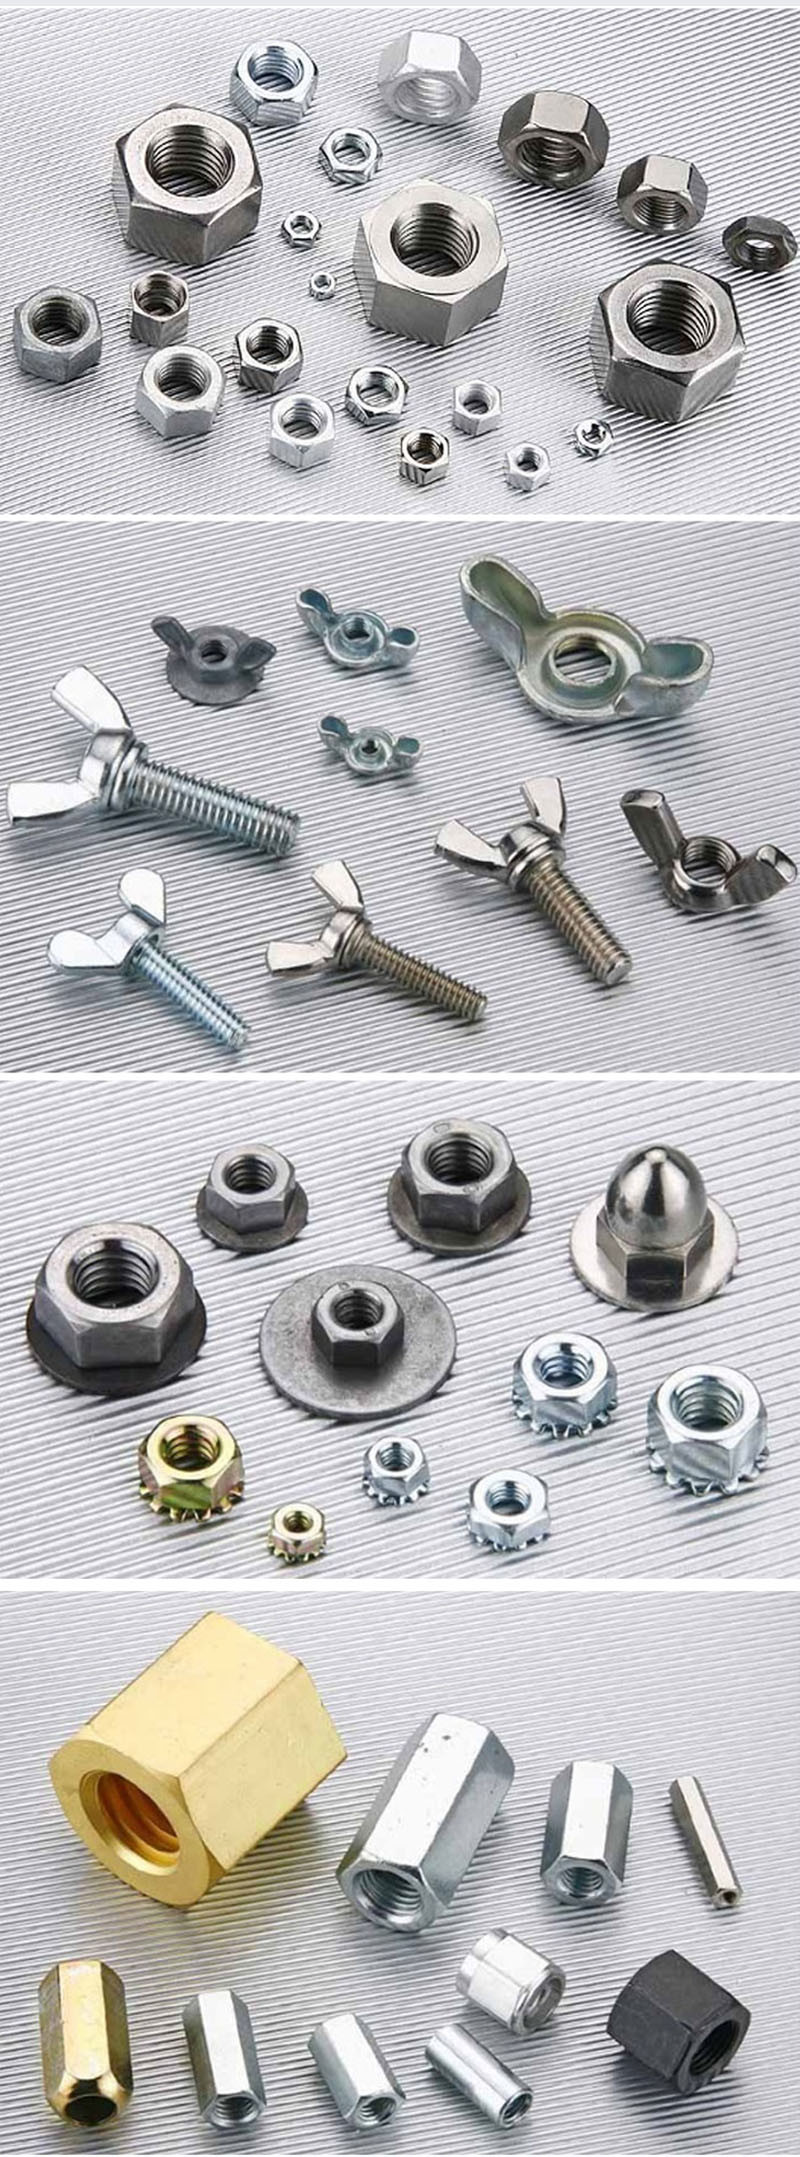 ISO8677, Is08678, DIN603, Mushroom Head Square Neck Bolts, Carriage Bolts